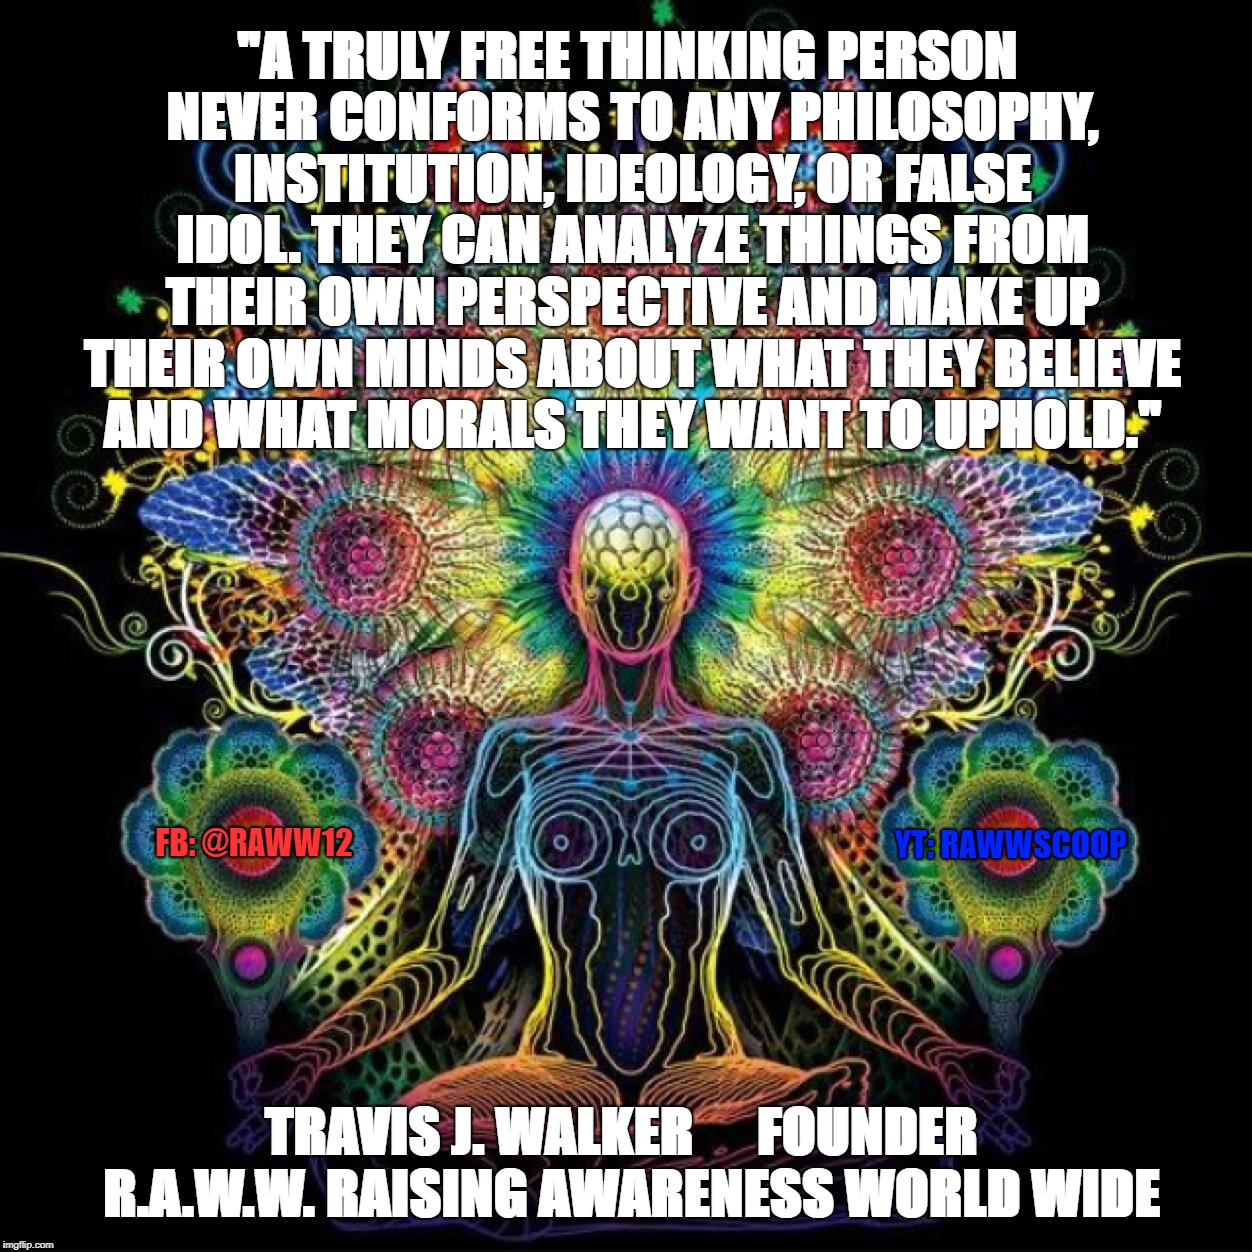 "A TRULY FREE THINKING PERSON NEVER CONFORMS TO ANY PHILOSOPHY, INSTITUTION, IDEOLOGY, OR FALSE IDOL. THEY CAN ANALYZE THINGS FROM THEIR OWN PERSPECTIVE AND MAKE UP THEIR OWN MINDS ABOUT WHAT THEY BELIEVE AND WHAT MORALS THEY WANT TO UPHOLD."; YT: RAWWSCOOP; FB: @RAWW12; TRAVIS J. WALKER      FOUNDER  R.A.W.W. RAISING AWARENESS WORLD WIDE | image tagged in free thinker | made w/ Imgflip meme maker